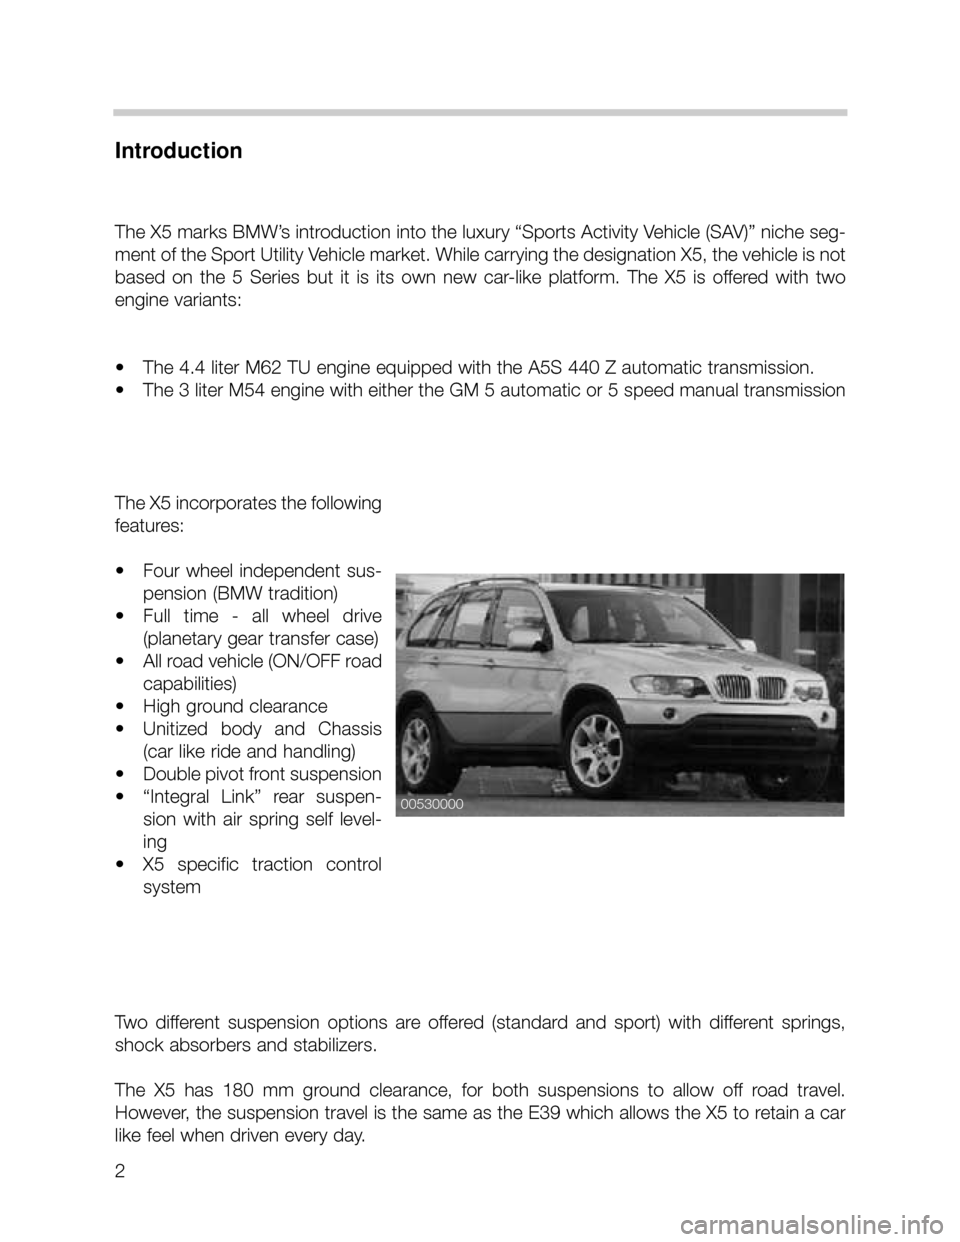 BMW X5 2001 E53 Workshop Manual 2
Introduction
The X5 marks BMW’s introduction into the luxury “Sports Activity Vehicle (SAV)” niche seg-
ment of the Sport Utility Vehicle market. While carrying the designation X5, the vehicle